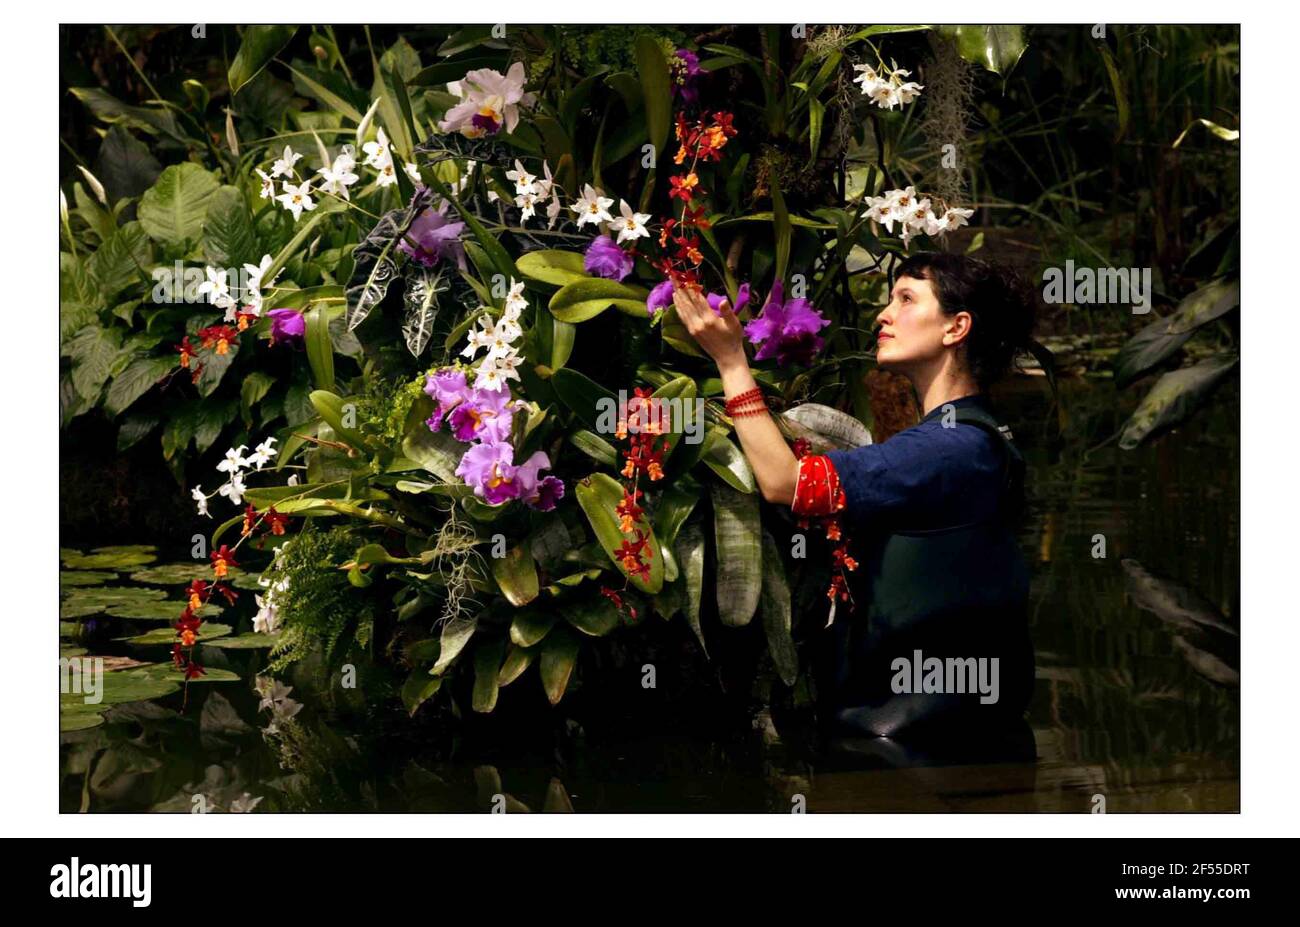 Orchid aphrodisiac effect for Valentine's at Kew Gardens. Lisa Hall with some of the quarter of a million orchids go on show in the hot, steamy Princess of Wales Conservatory for Kews tenth orchid festival, Orchids Exposedpic David Sandison 13/2/2004 Stock Photo